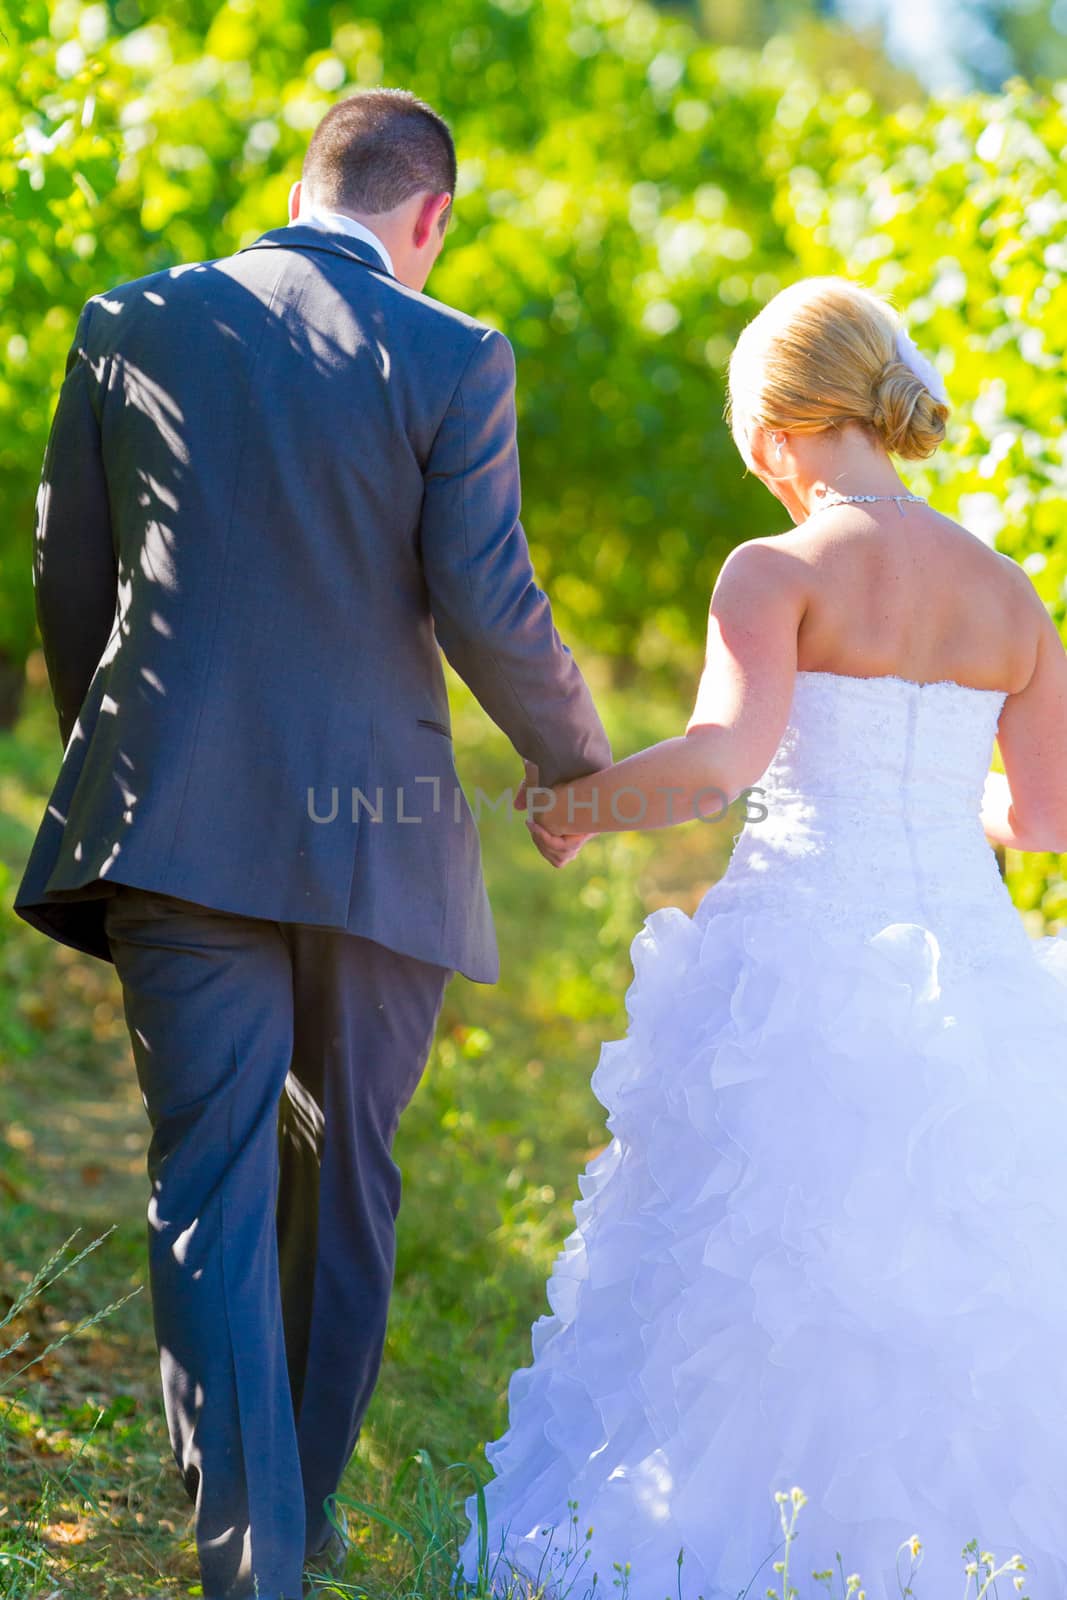 A bride and groom walk away from the camera after their ceremony at a vineyard winery in Oregon.